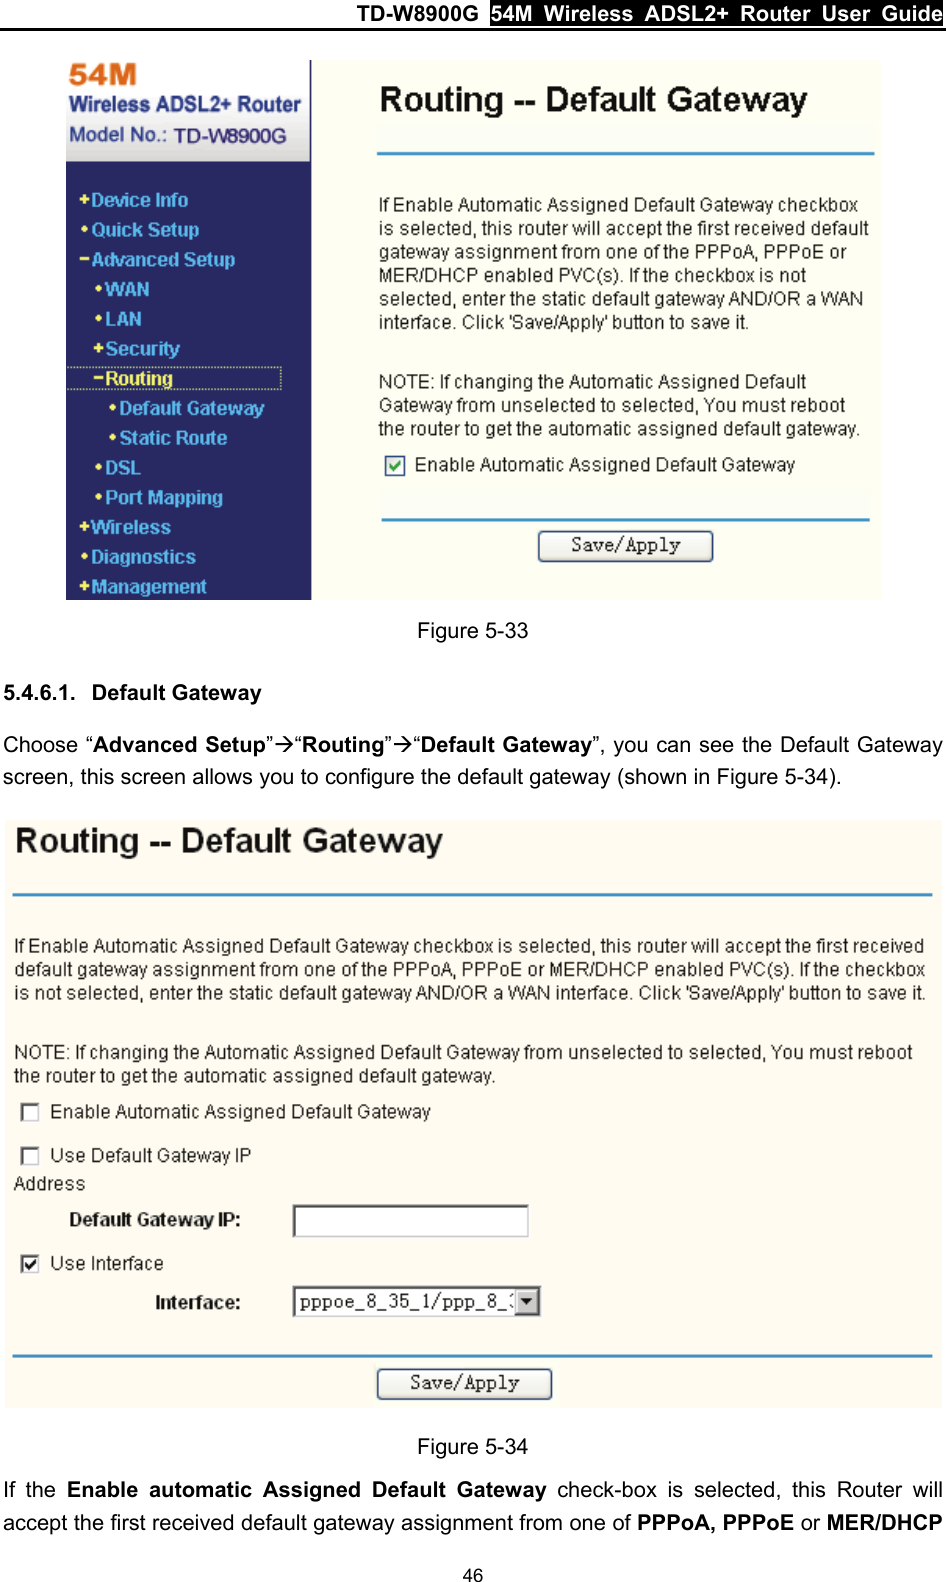 TD-W8900G  54M Wireless ADSL2+ Router User Guide 46  Figure 5-33 5.4.6.1.  Default Gateway Choose “Advanced Setup”Æ“Routing”Æ“Default Gateway”, you can see the Default Gateway screen, this screen allows you to configure the default gateway (shown in Figure 5-34).  Figure 5-34 If the Enable automatic Assigned Default Gateway check-box is selected, this Router will accept the first received default gateway assignment from one of PPPoA, PPPoE or MER/DHCP 